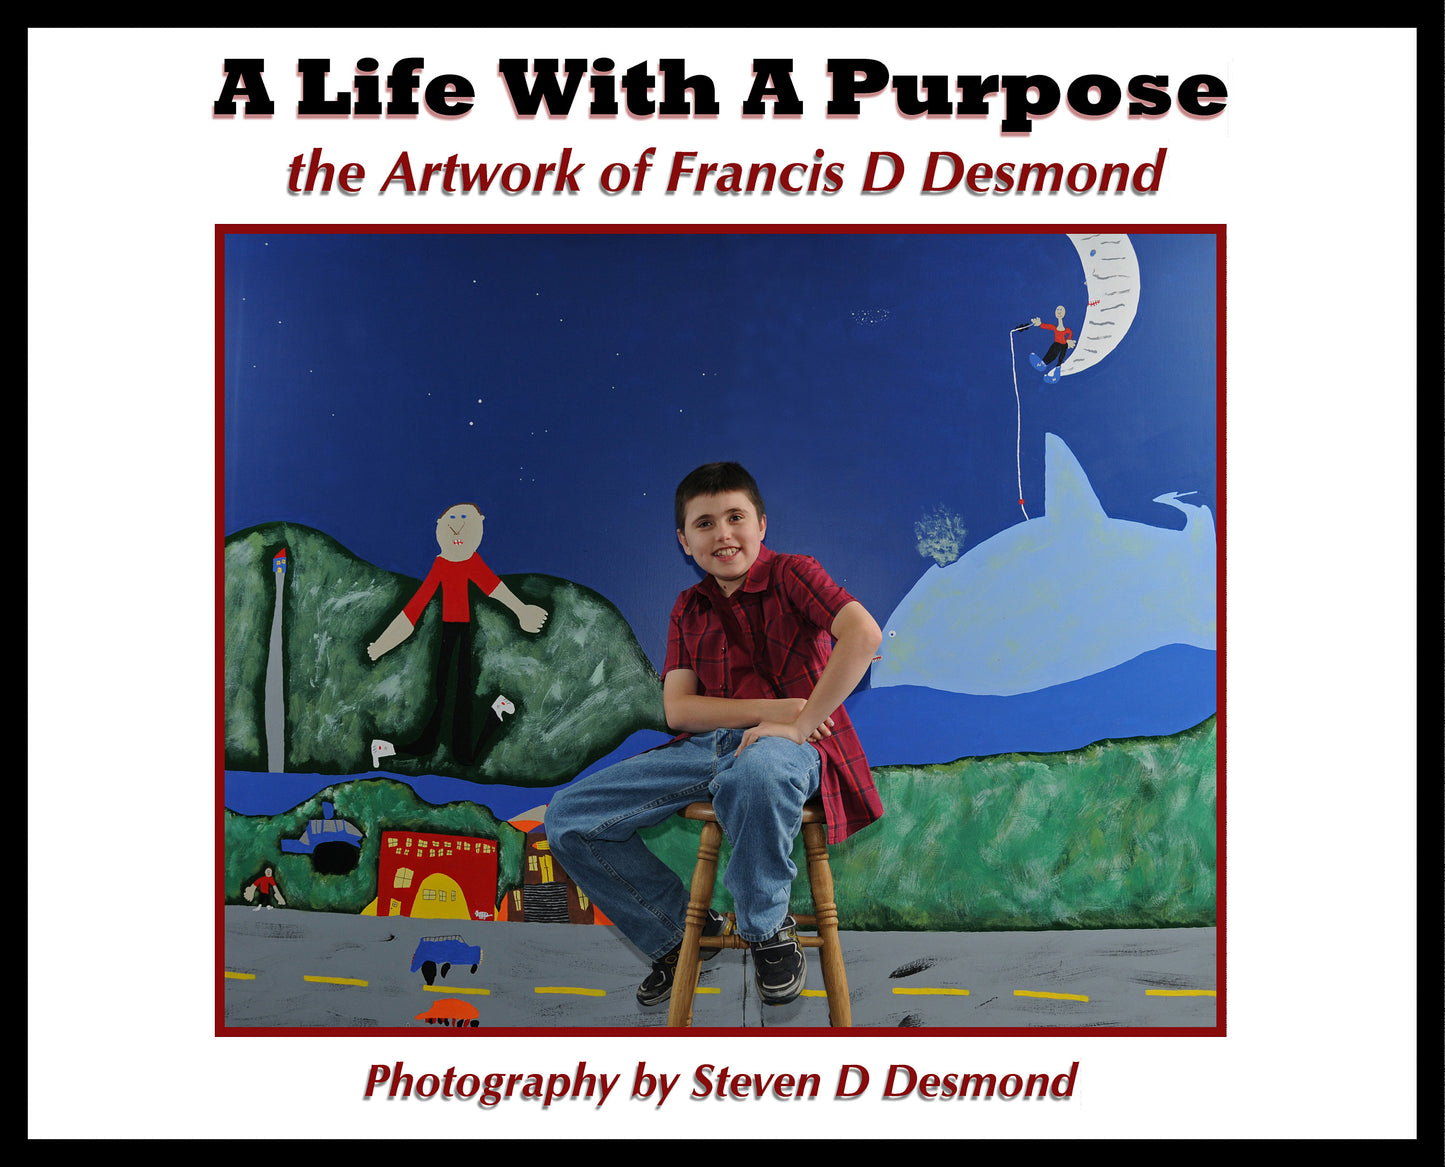 Front cover of "A Life With A Purpose" book.